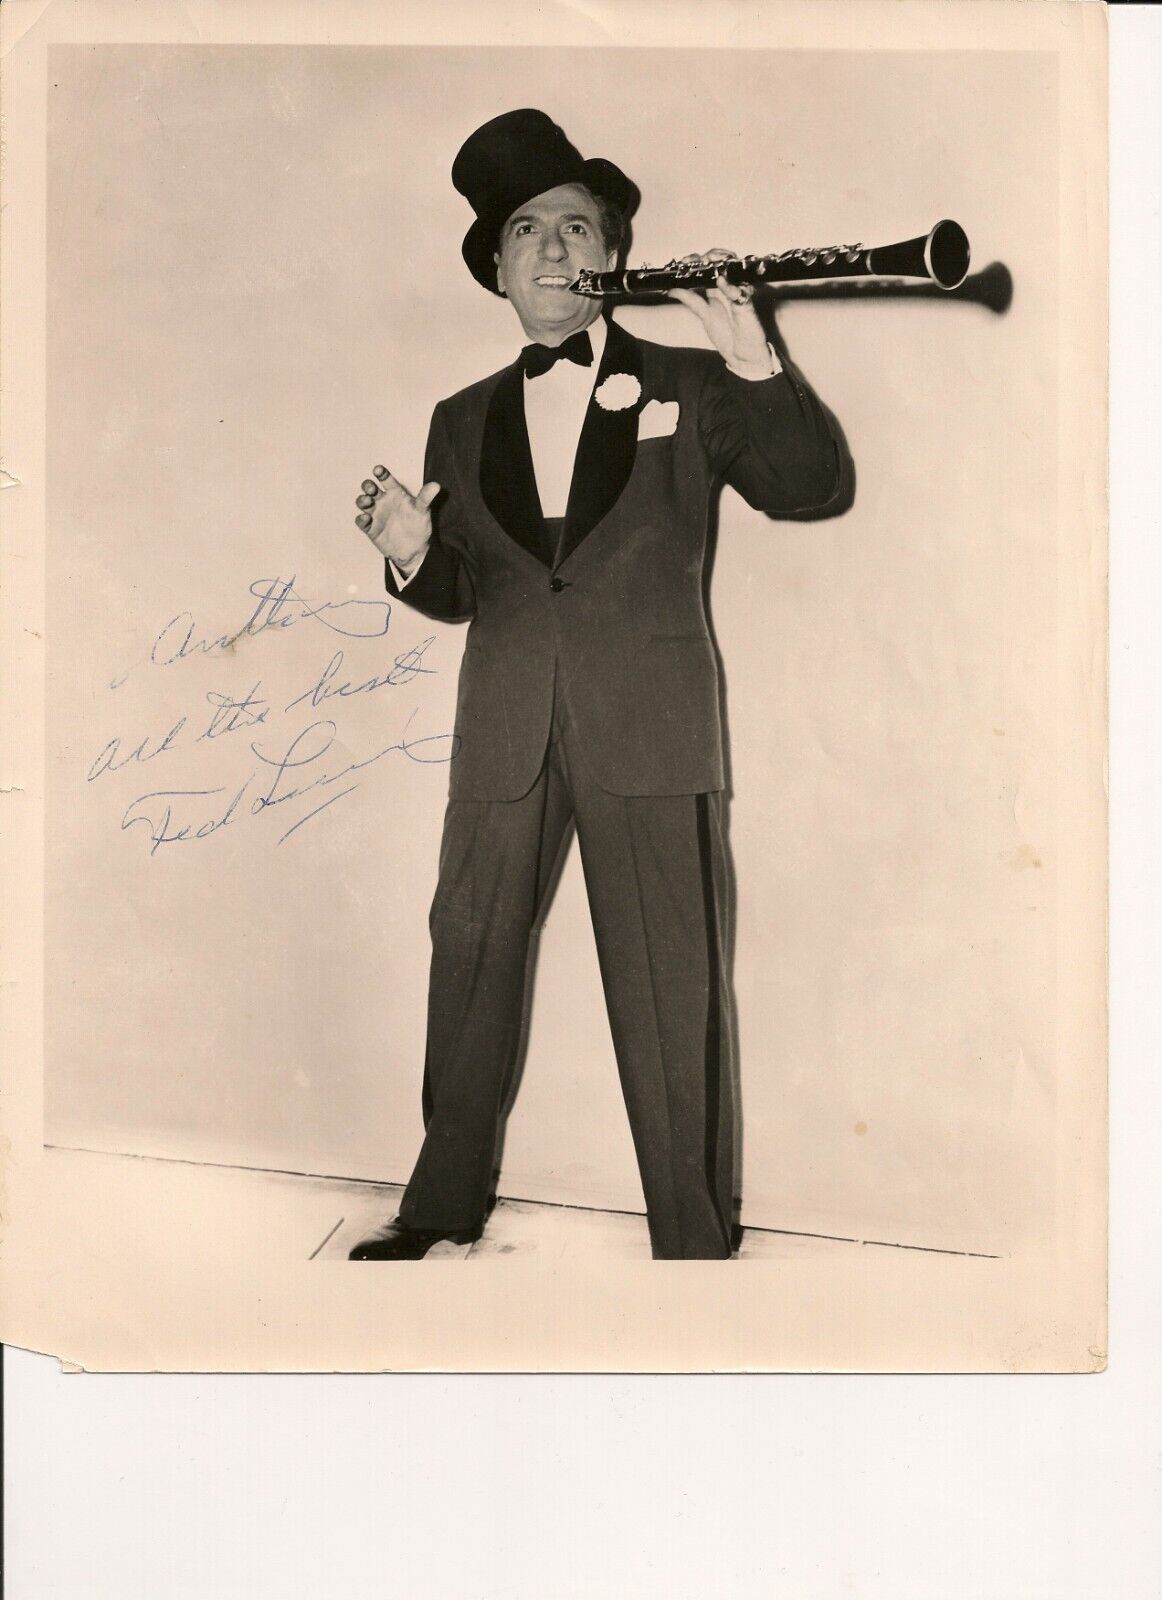 Ted Lewis Clarinet Bandleader Musician 1950's Autographed 8 x 10 Promo Photo